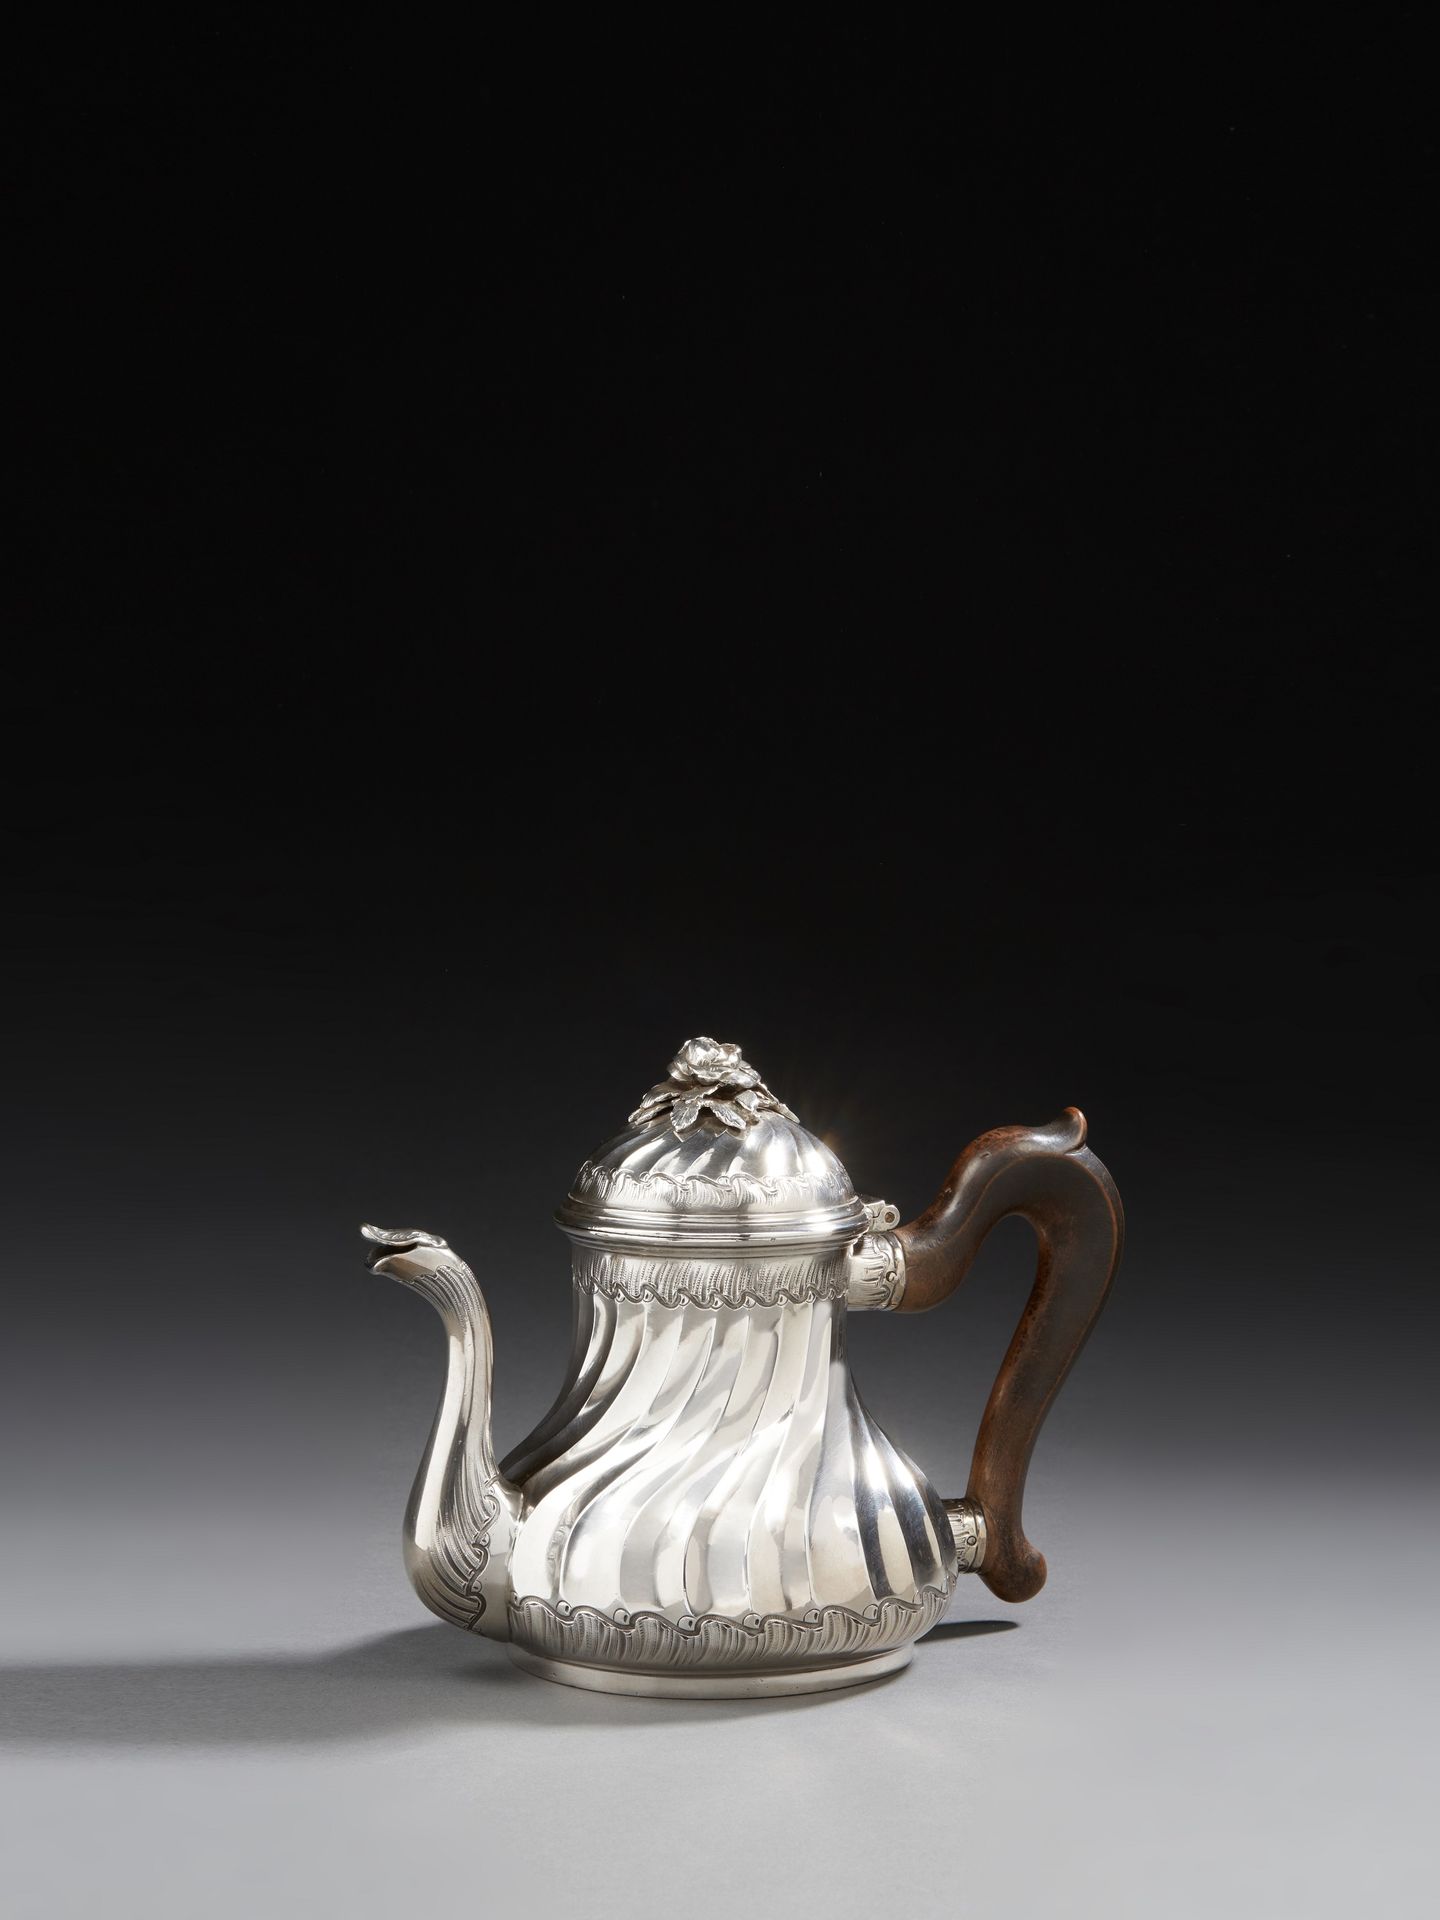 Null BORDEAUX 1740 - 1741
Silver teapot, model with twisted ribs on a plain fram&hellip;